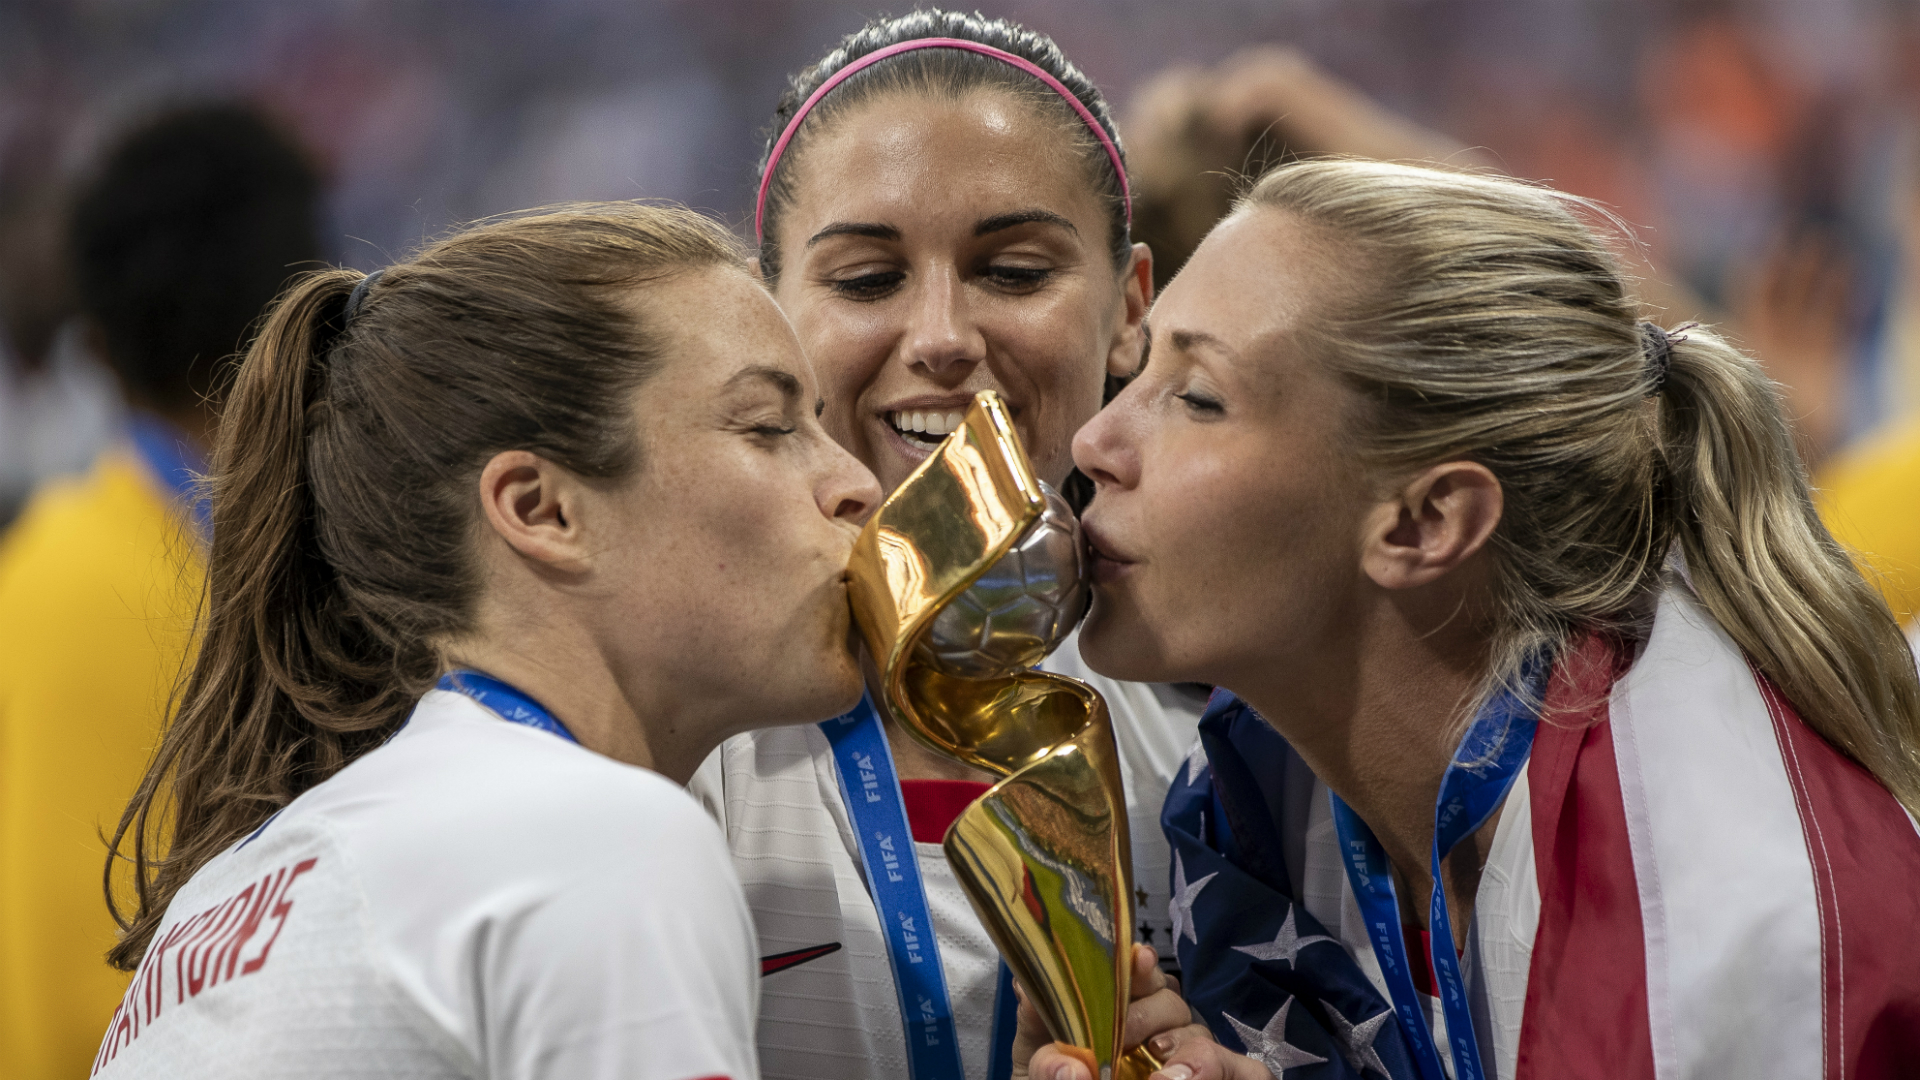 After a successful defence of the World Cup in France, the United States now lead the FIFA women's rankings by the biggest margin ever